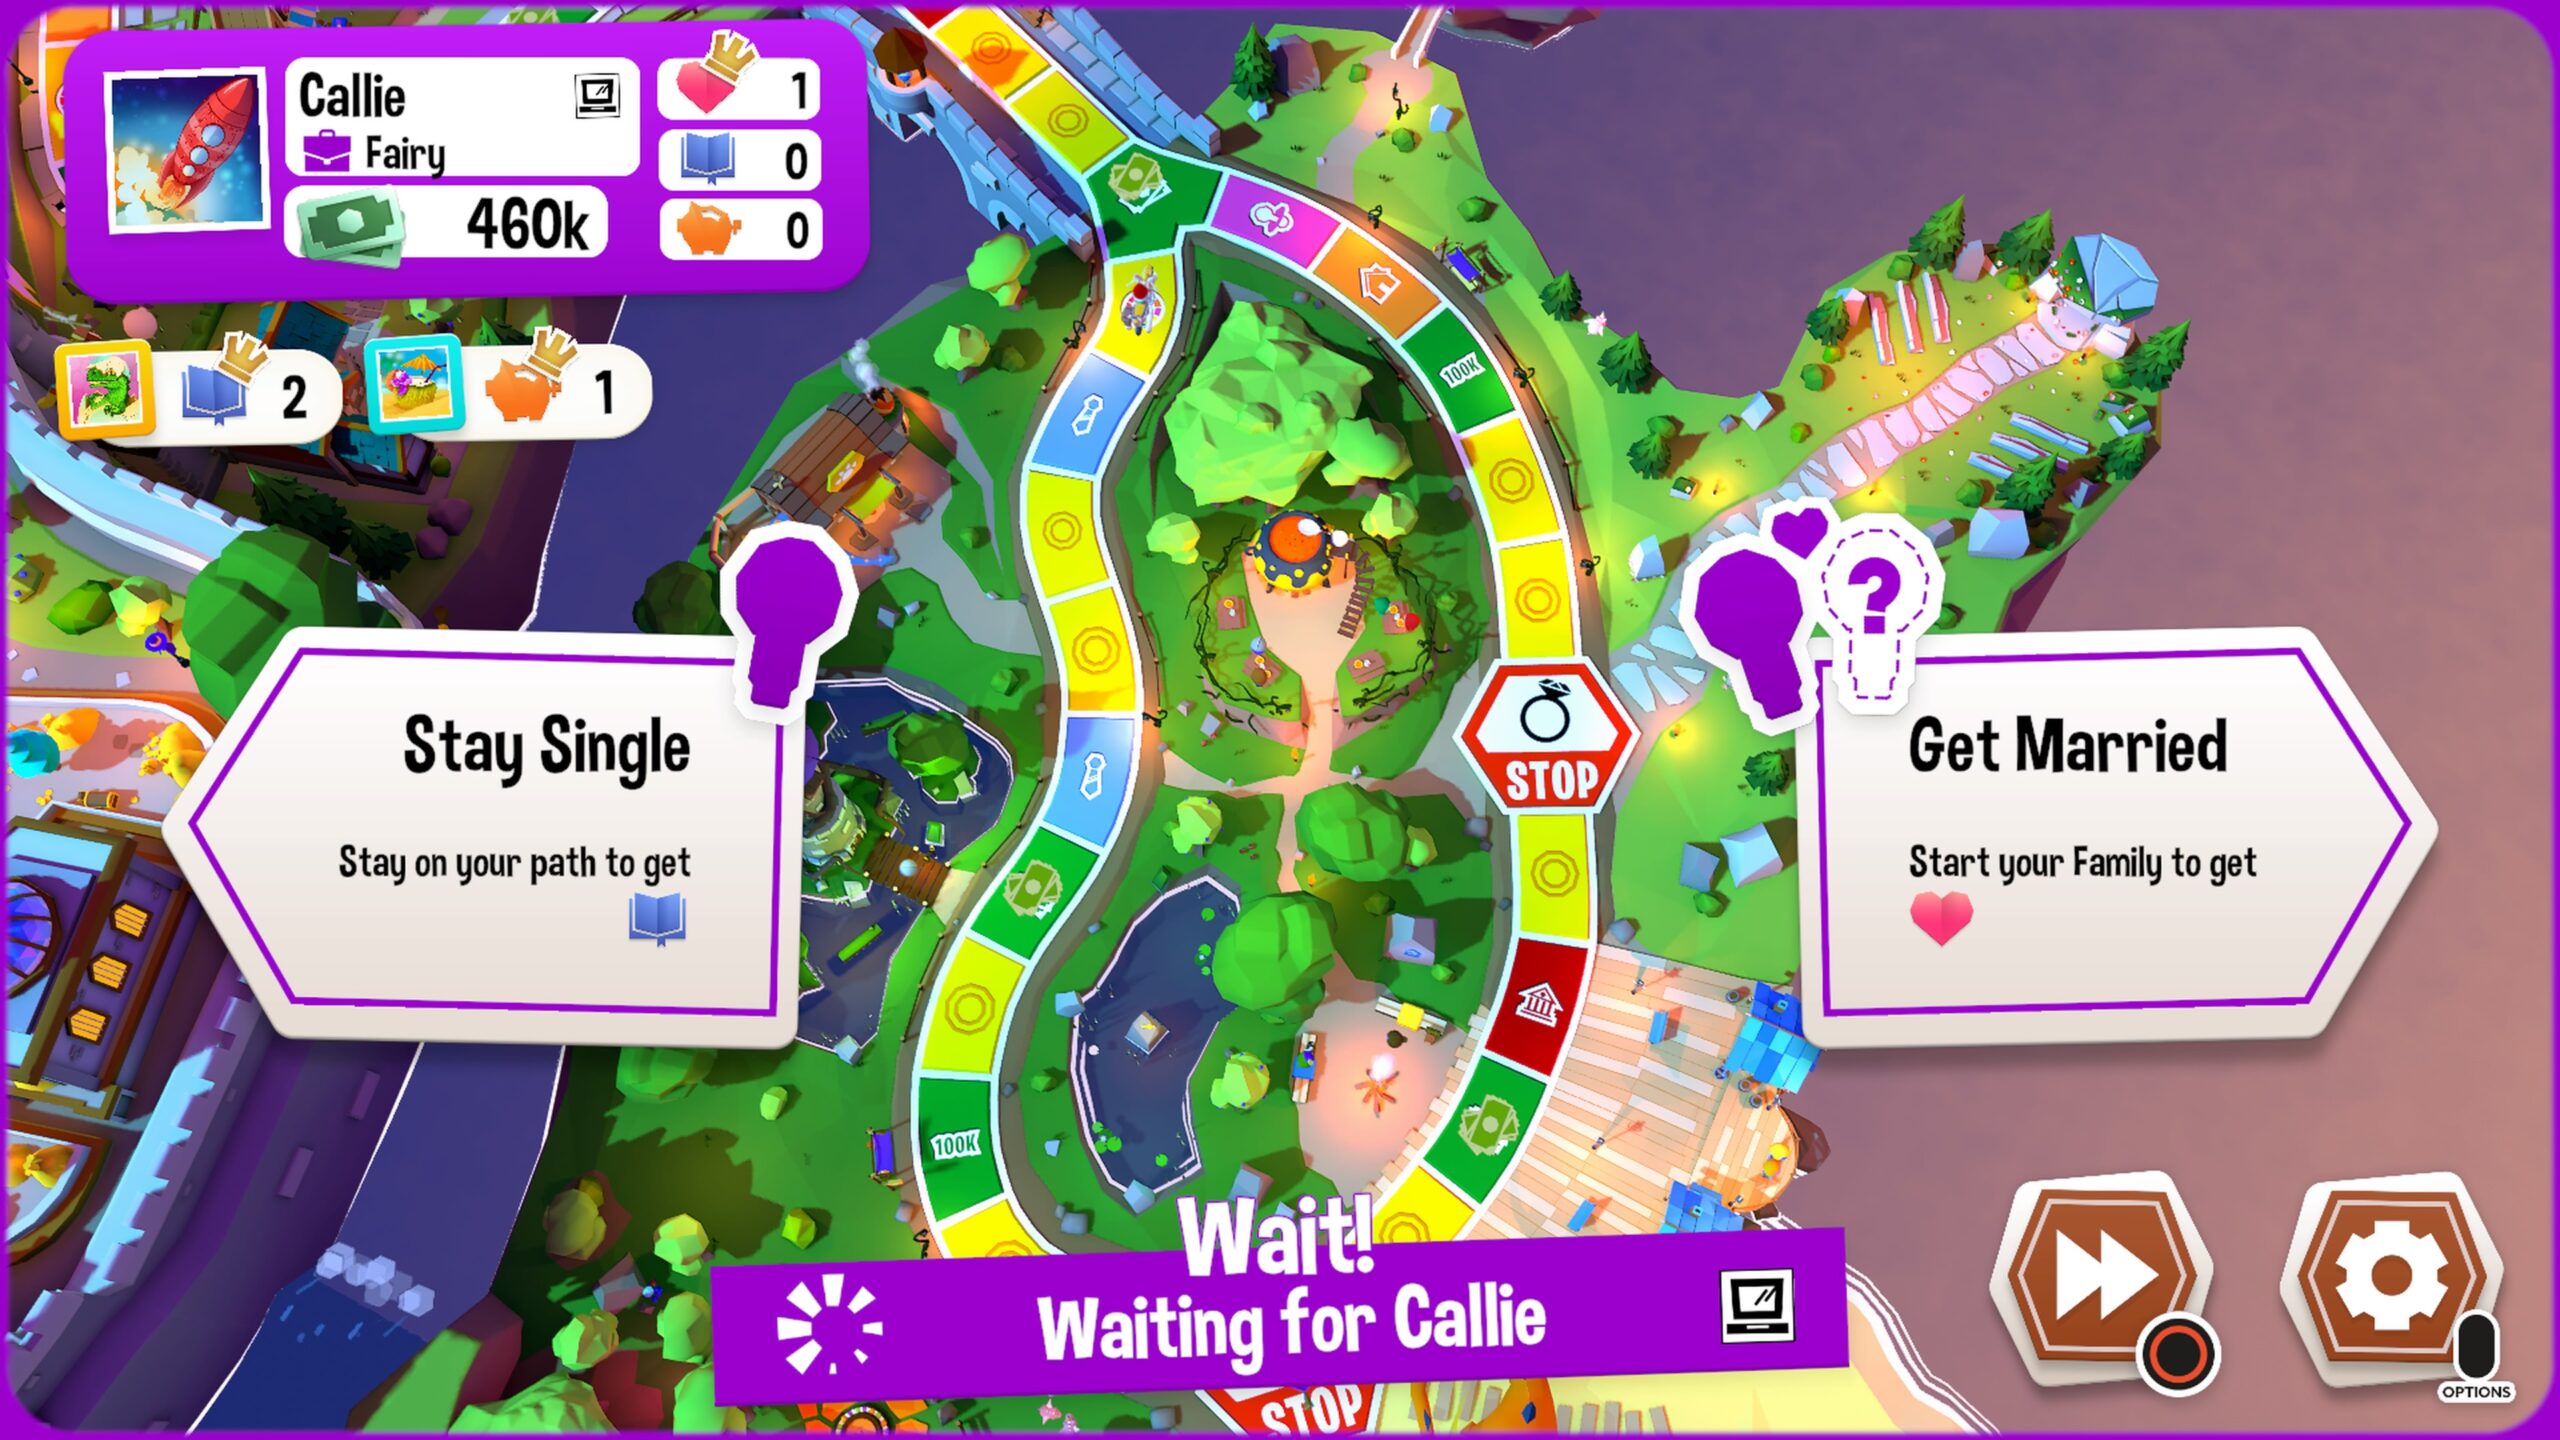 The Game of Life 2 review